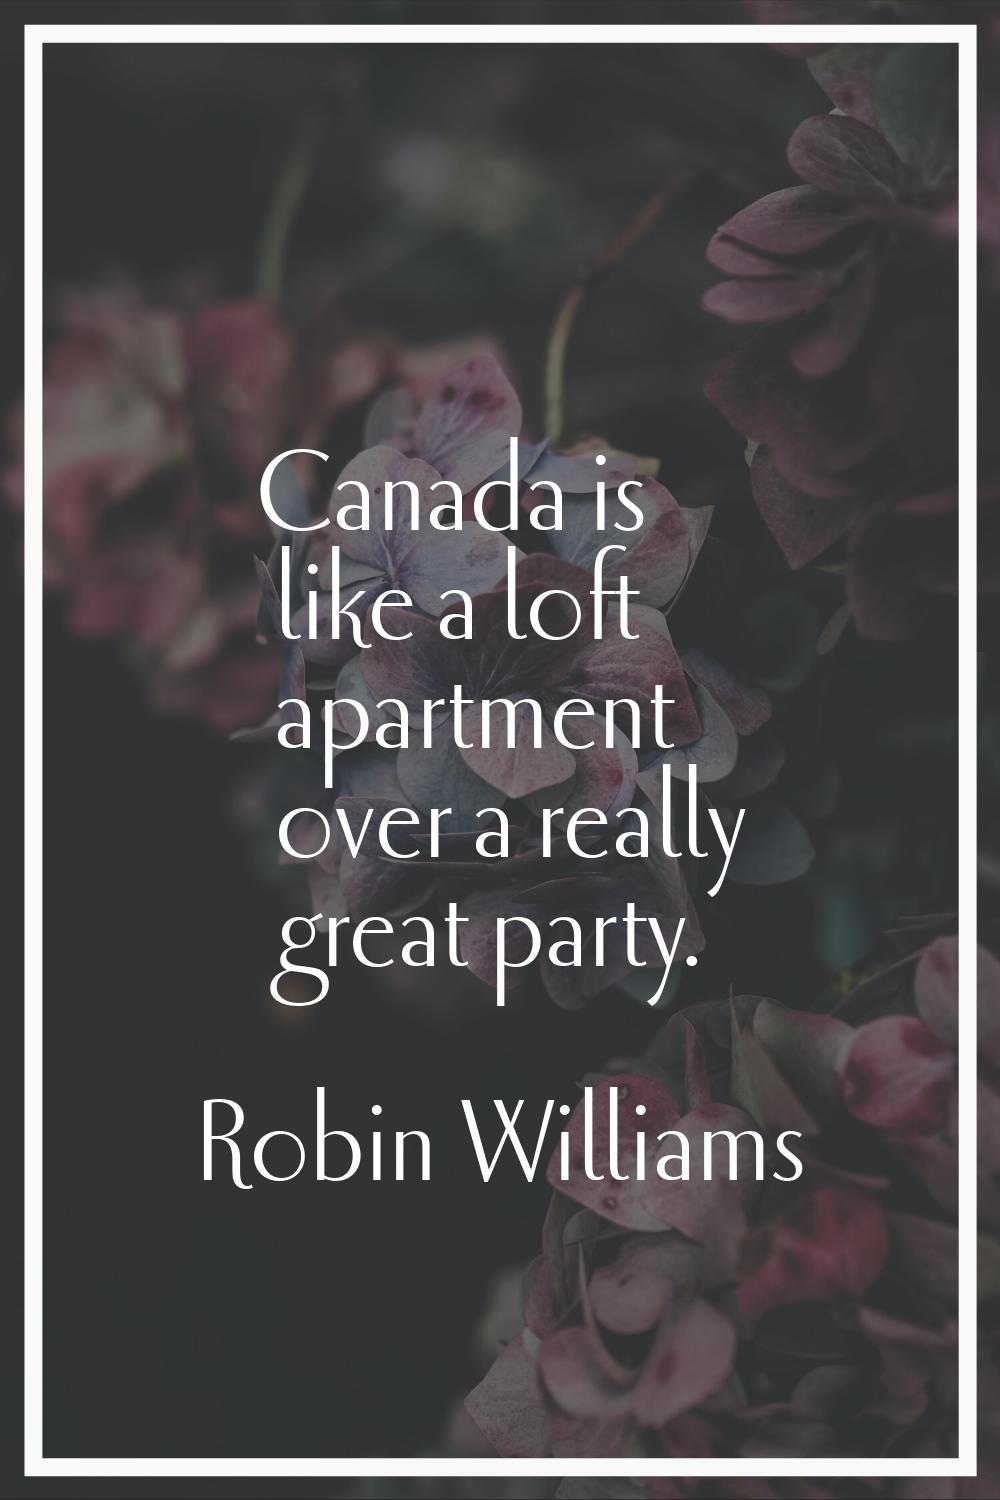 Canada is like a loft apartment over a really great party.